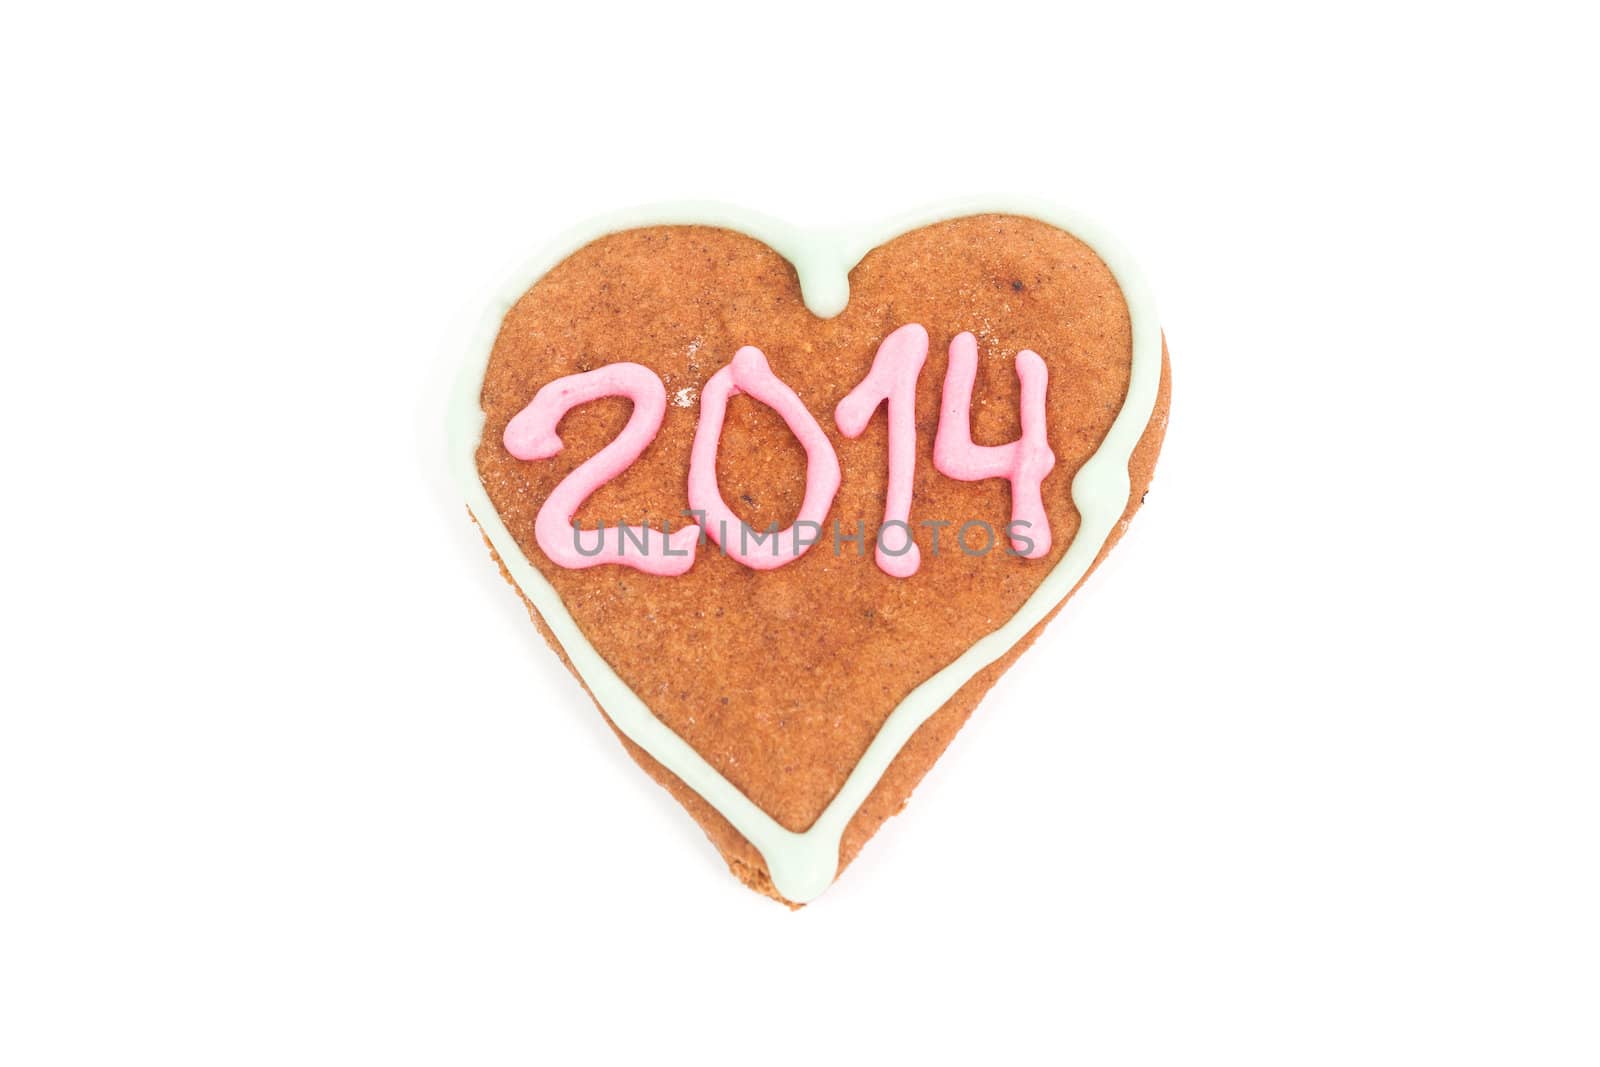 Homemade heart shape cookie isolated on white with 2014 number